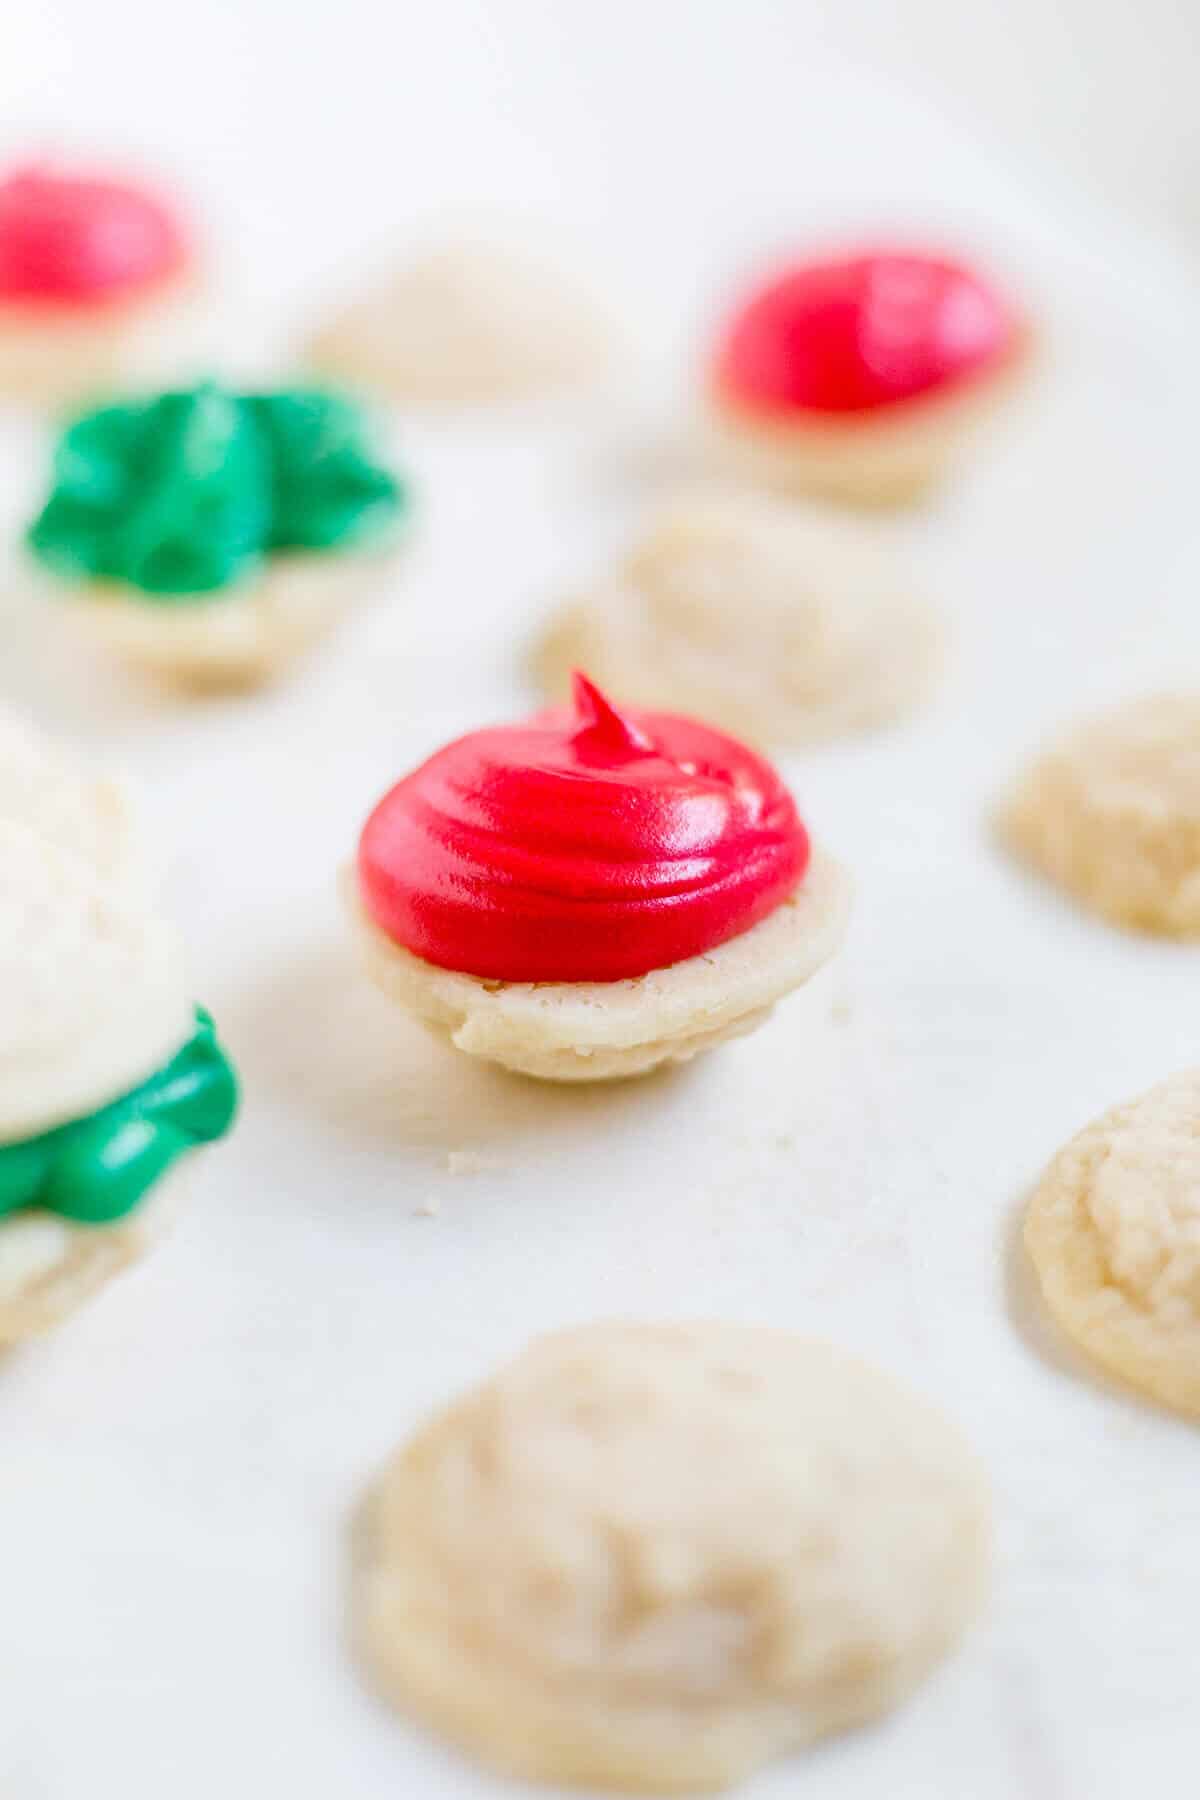 Melting moments sandwich cookies are a must-make Christmas cookie! They're tiny cookies sandwiched with a thick and creamy frosting dyed red and green. This festive cookie recipe will be a new family favorite.